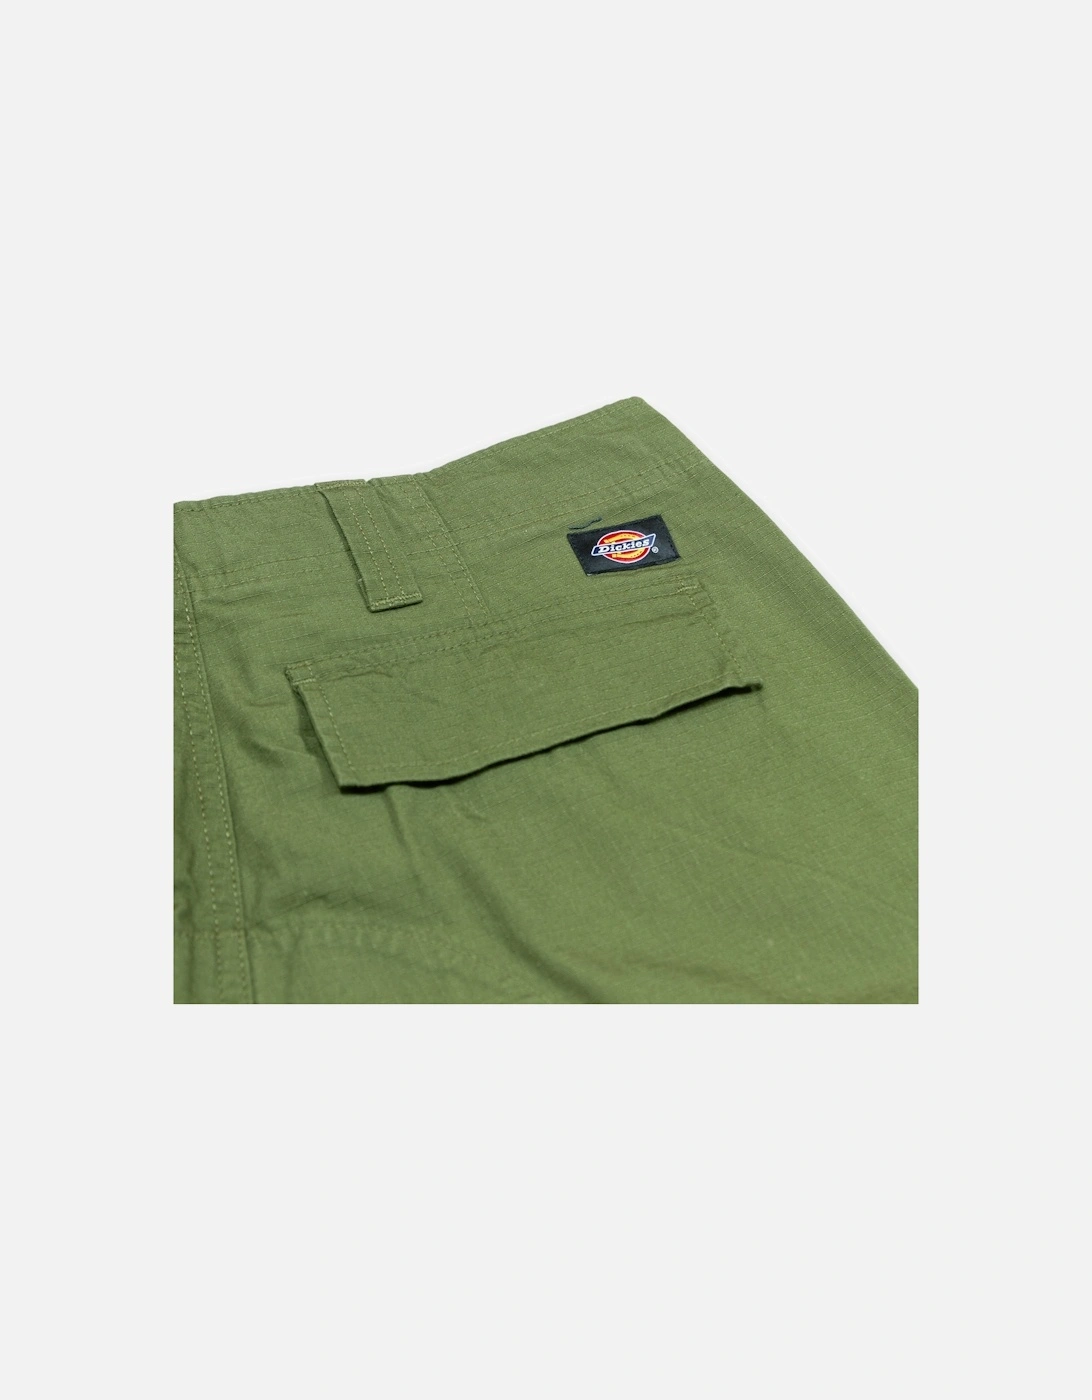 Eagle Bend Pant - Military Green